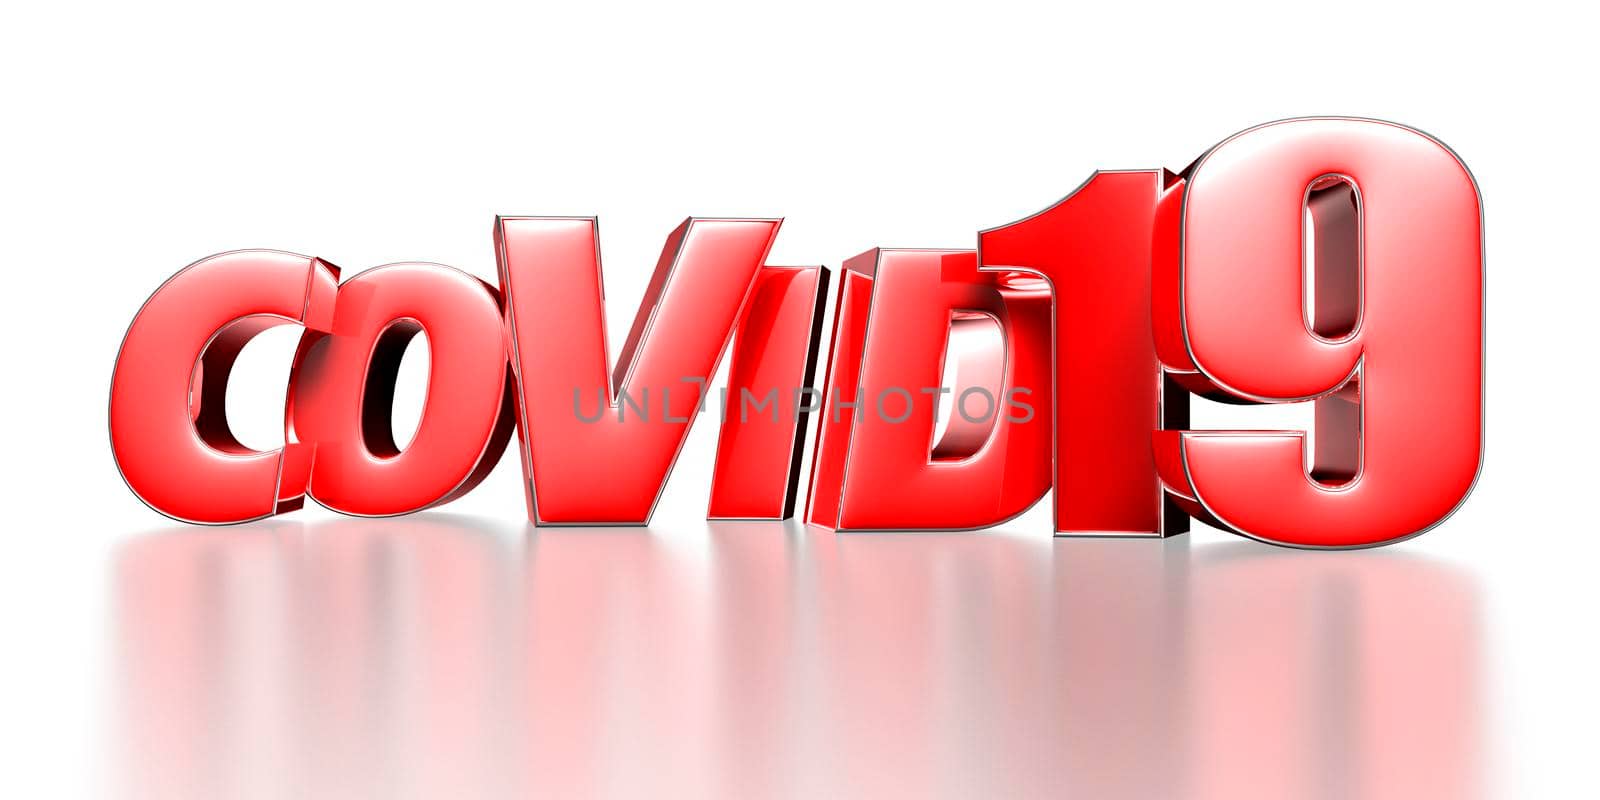 Covid 19 red 3D illustration on white background with clipping path.